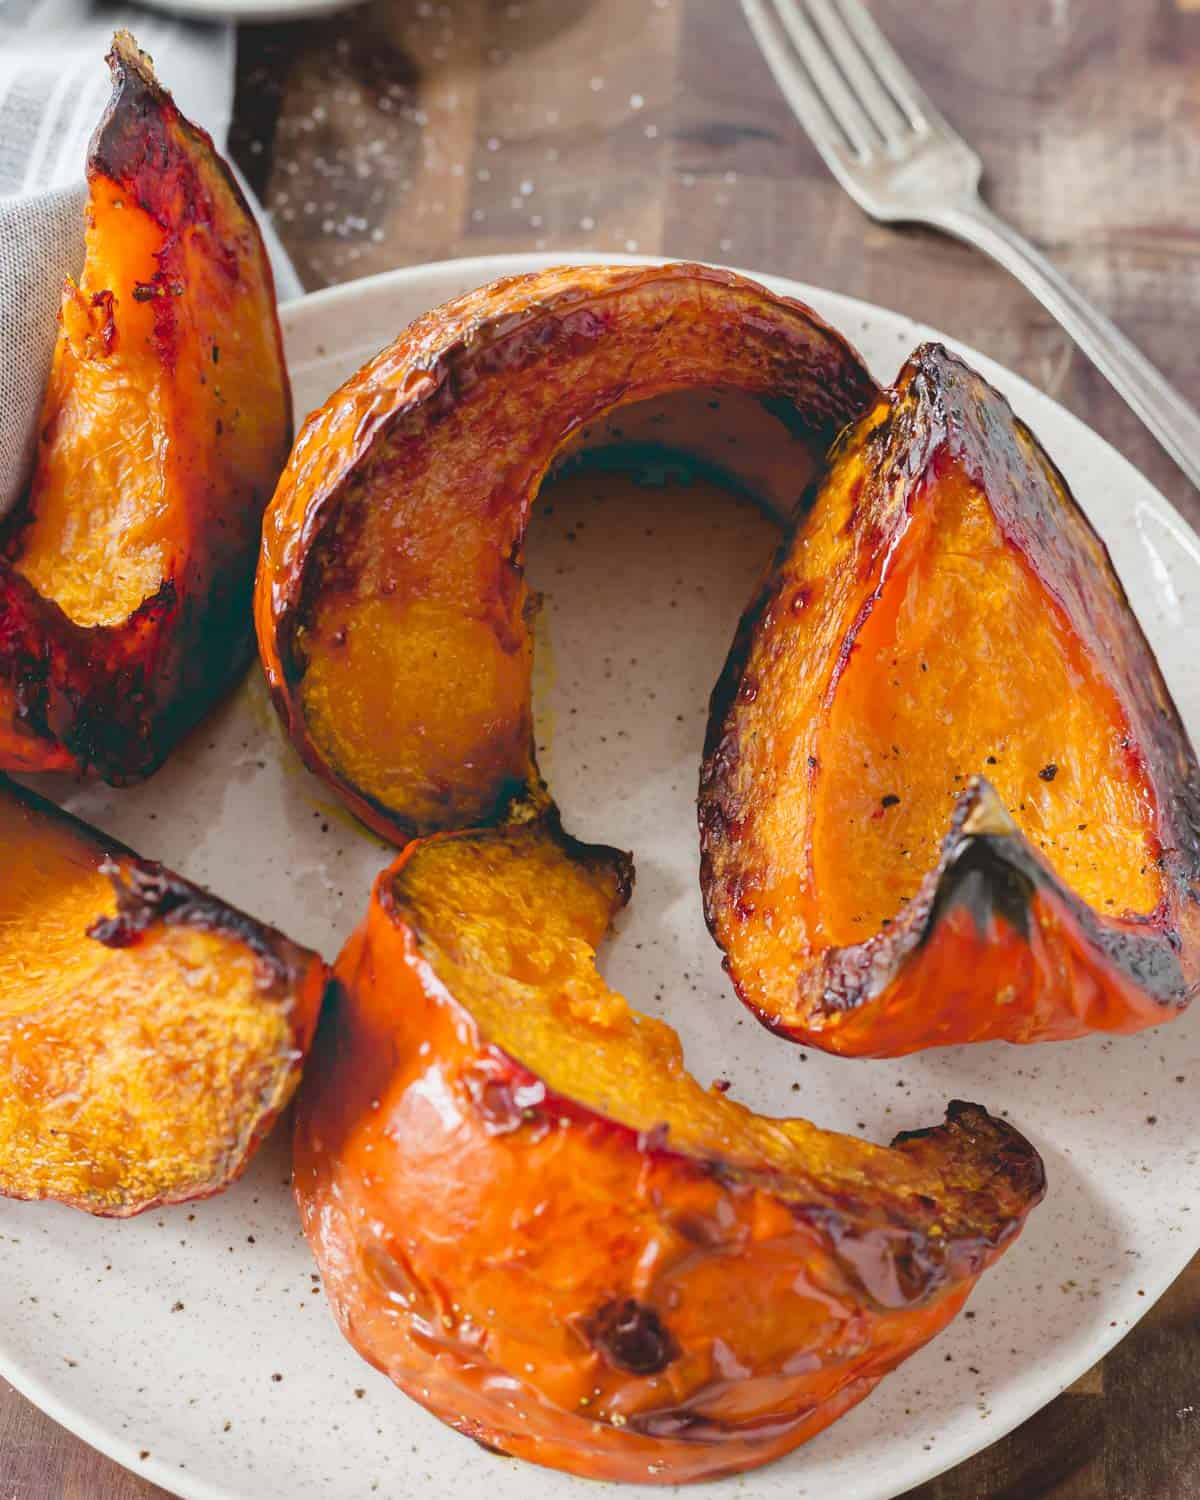 Roasted red kuri squash wedges on a plate.